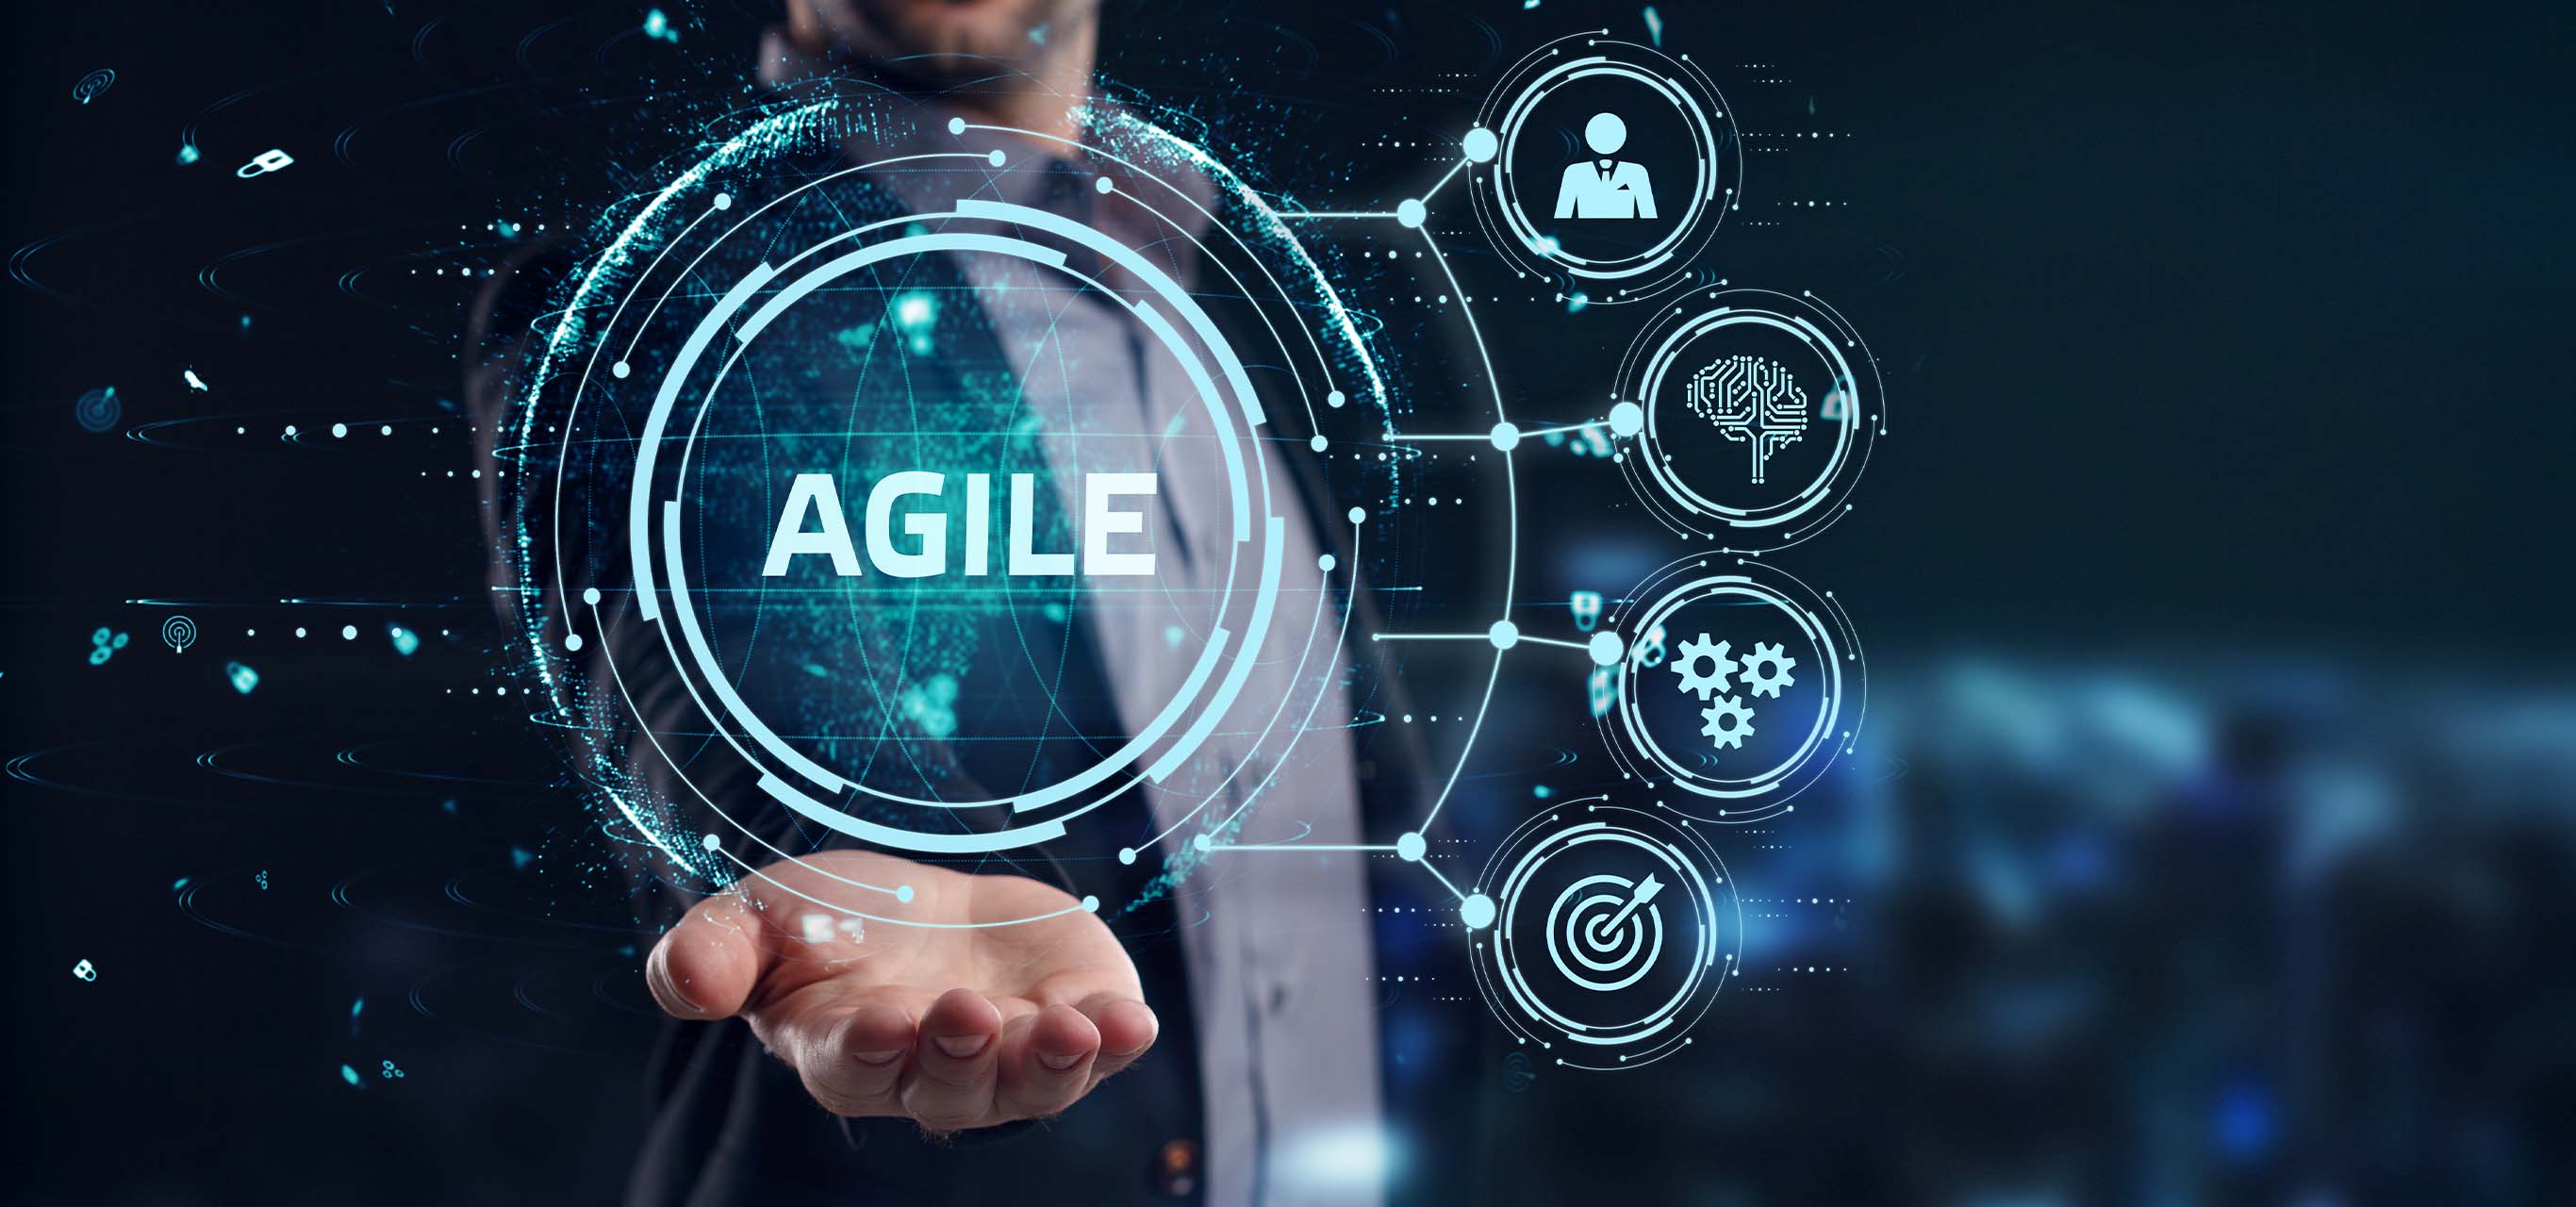 Agile strategy implementation? With Objectives and Key Results (OKR) to a goal-oriented organization